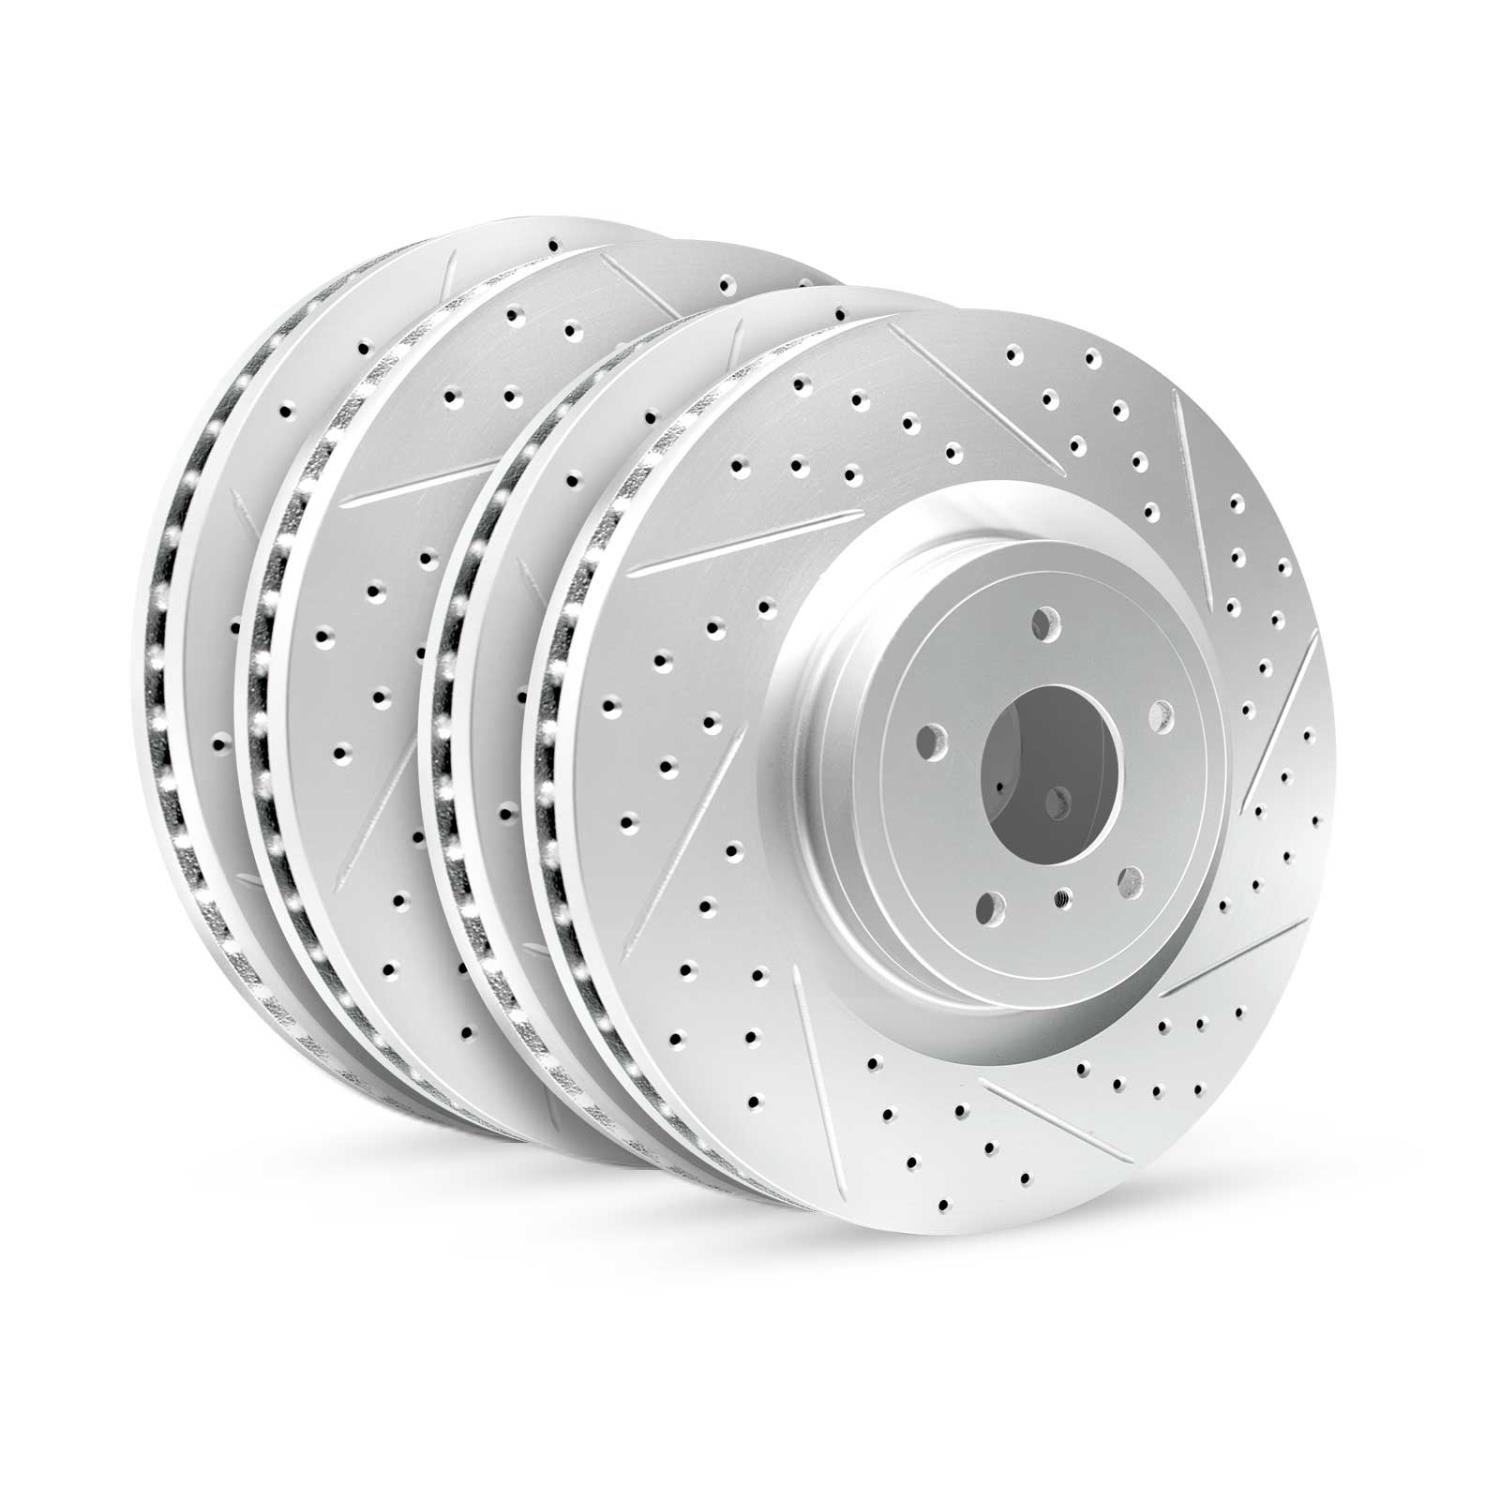 GEO-Carbon Drilled/Slotted Rotors, 2004-2005 Infiniti/Nissan, Position: Front/Rear